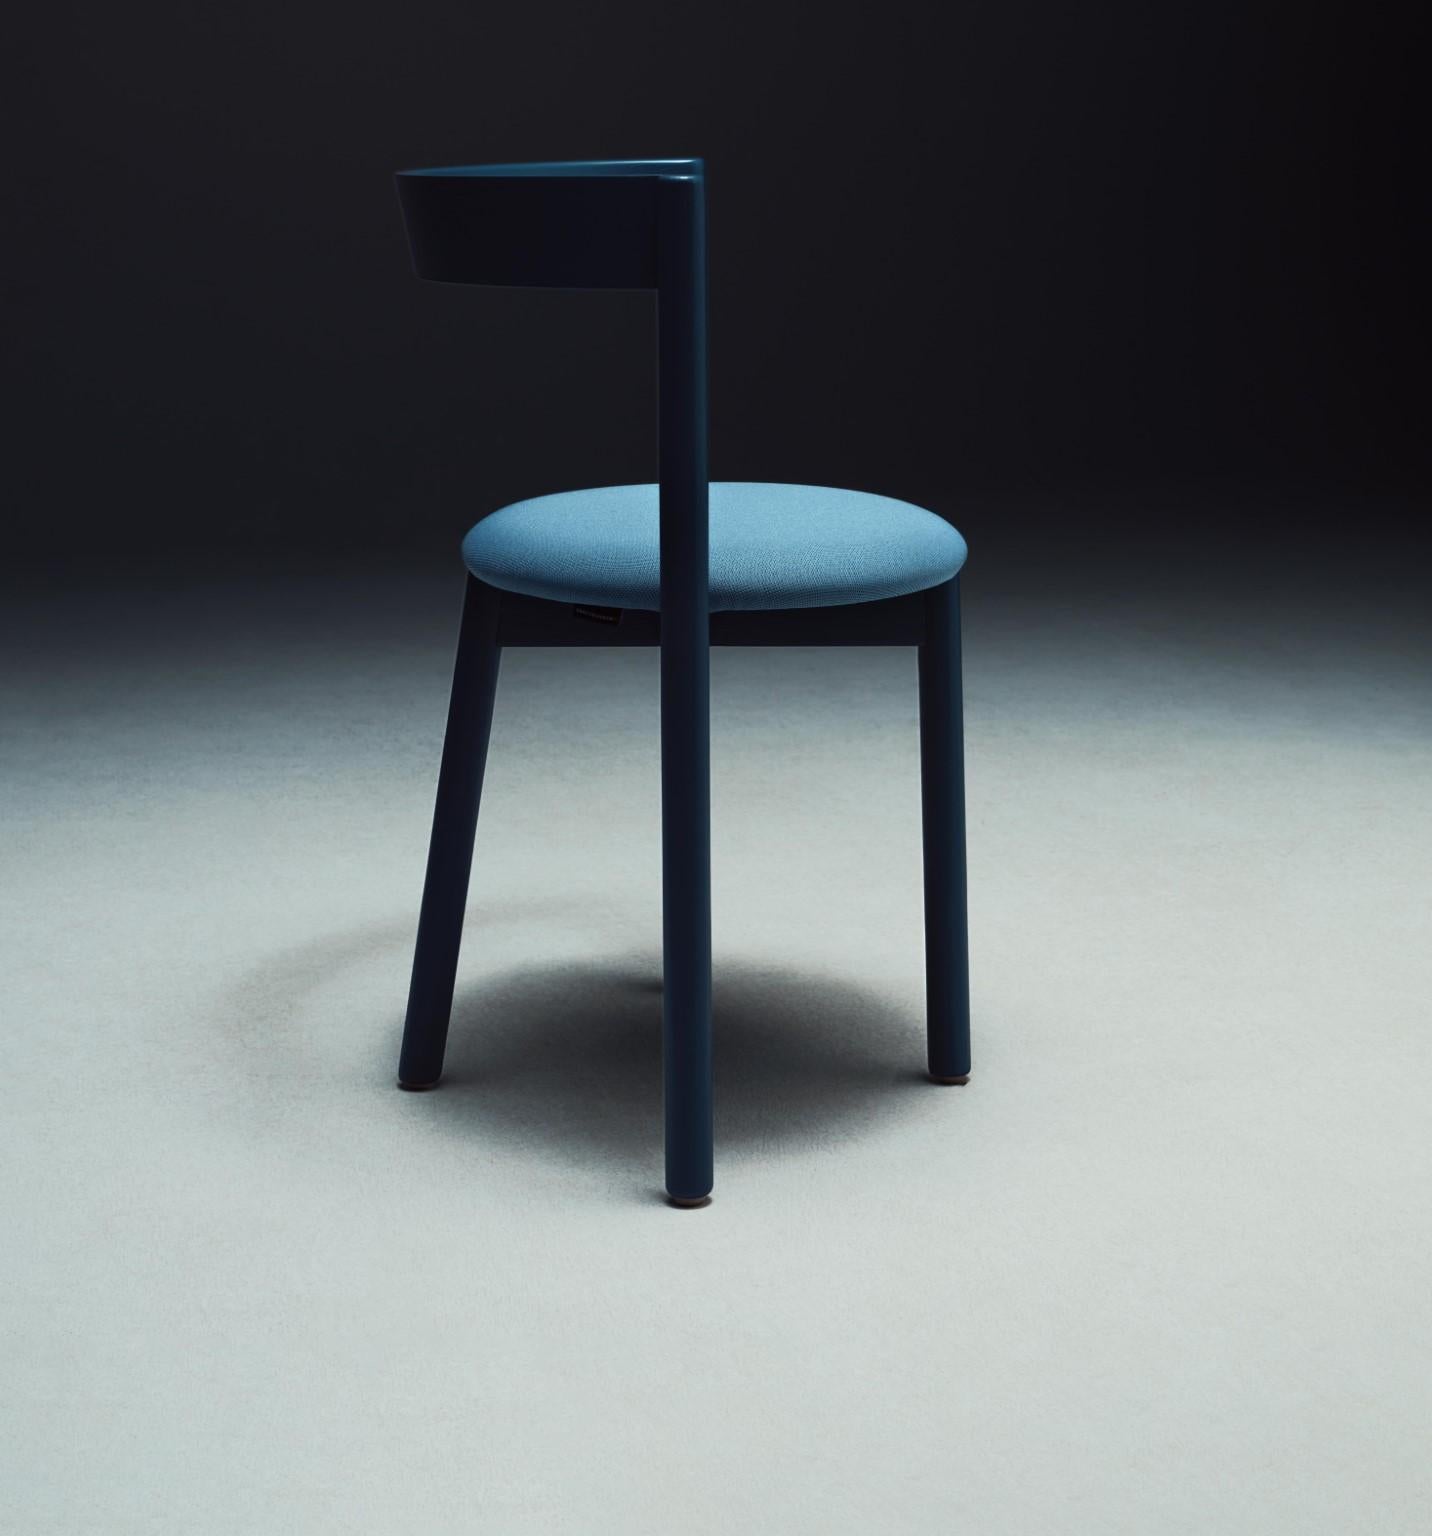 April chair by Neri&Hu
Dimensions: W 55.8 x D 46 x H 73 cm
Materials: Chair, dark green/black/coral/light blue stain on ash structure

Based on the ancestral know-how of the craftsman carpenters of La Manufacture, Neri Hu's solid wood chair